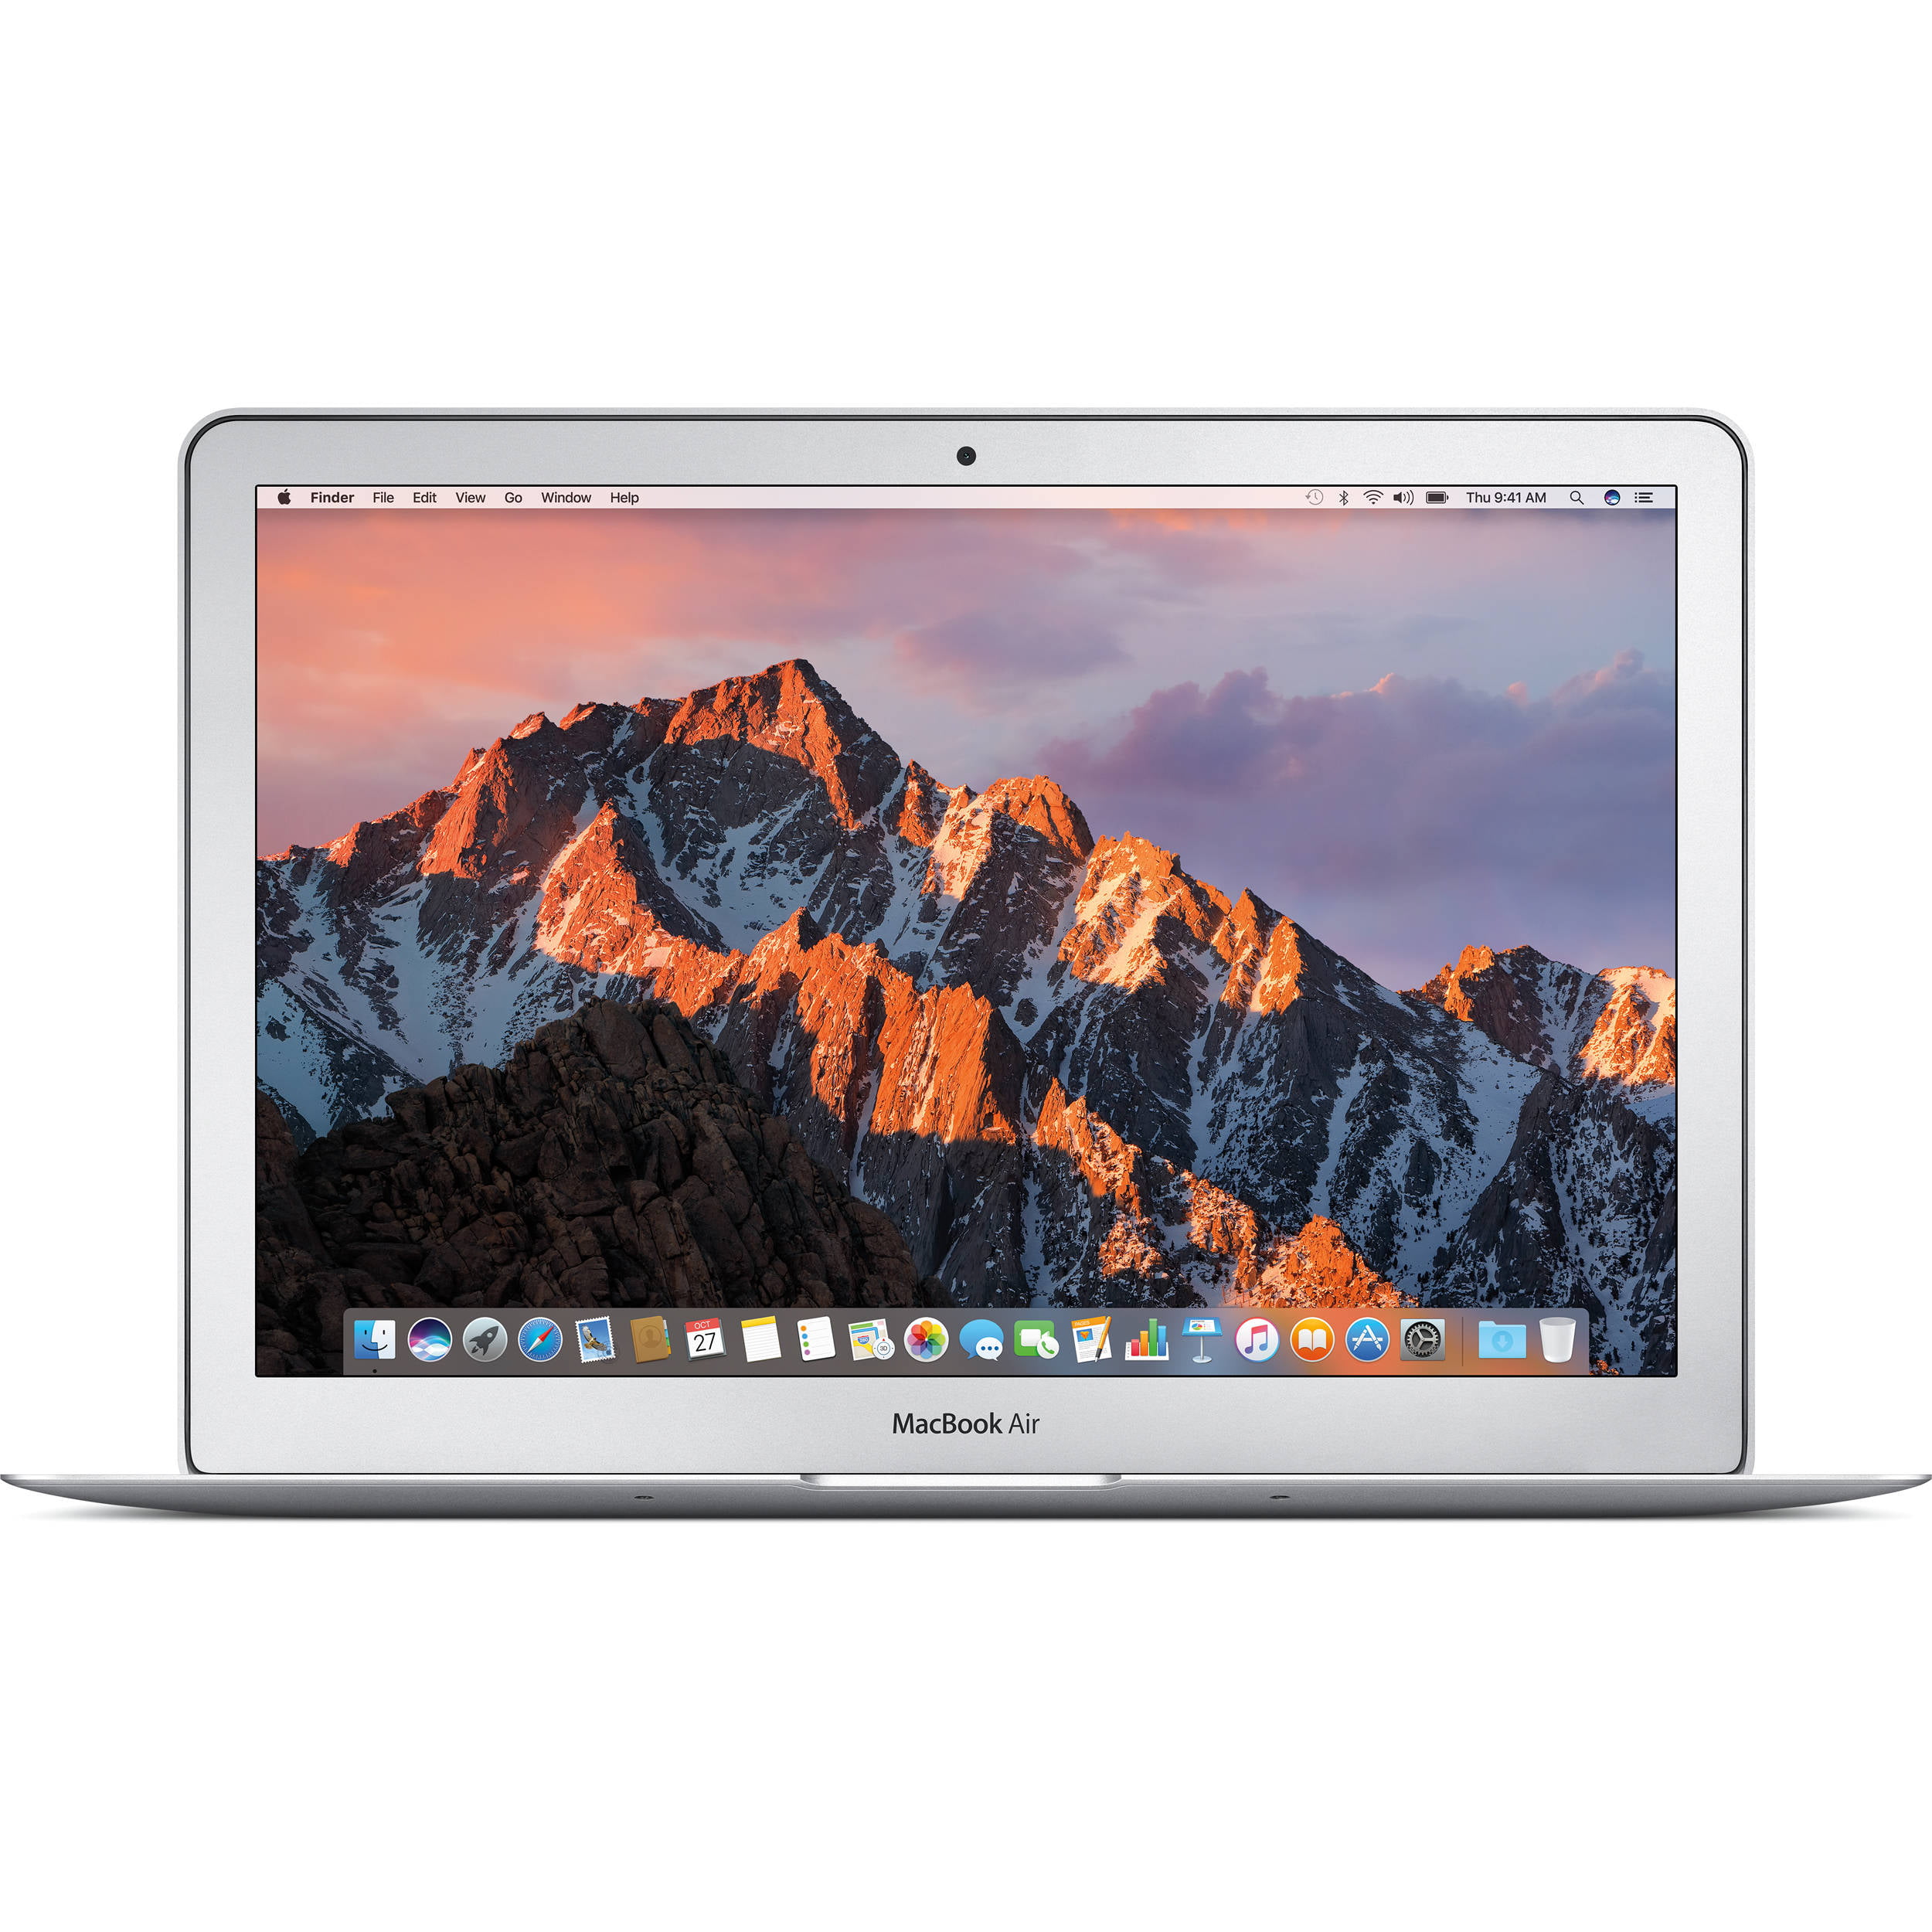 Apple MacBook Air 13 Inch 256GB (2017, Silver) (MQD42LLA) with Mouse + More  (New-Open Box)